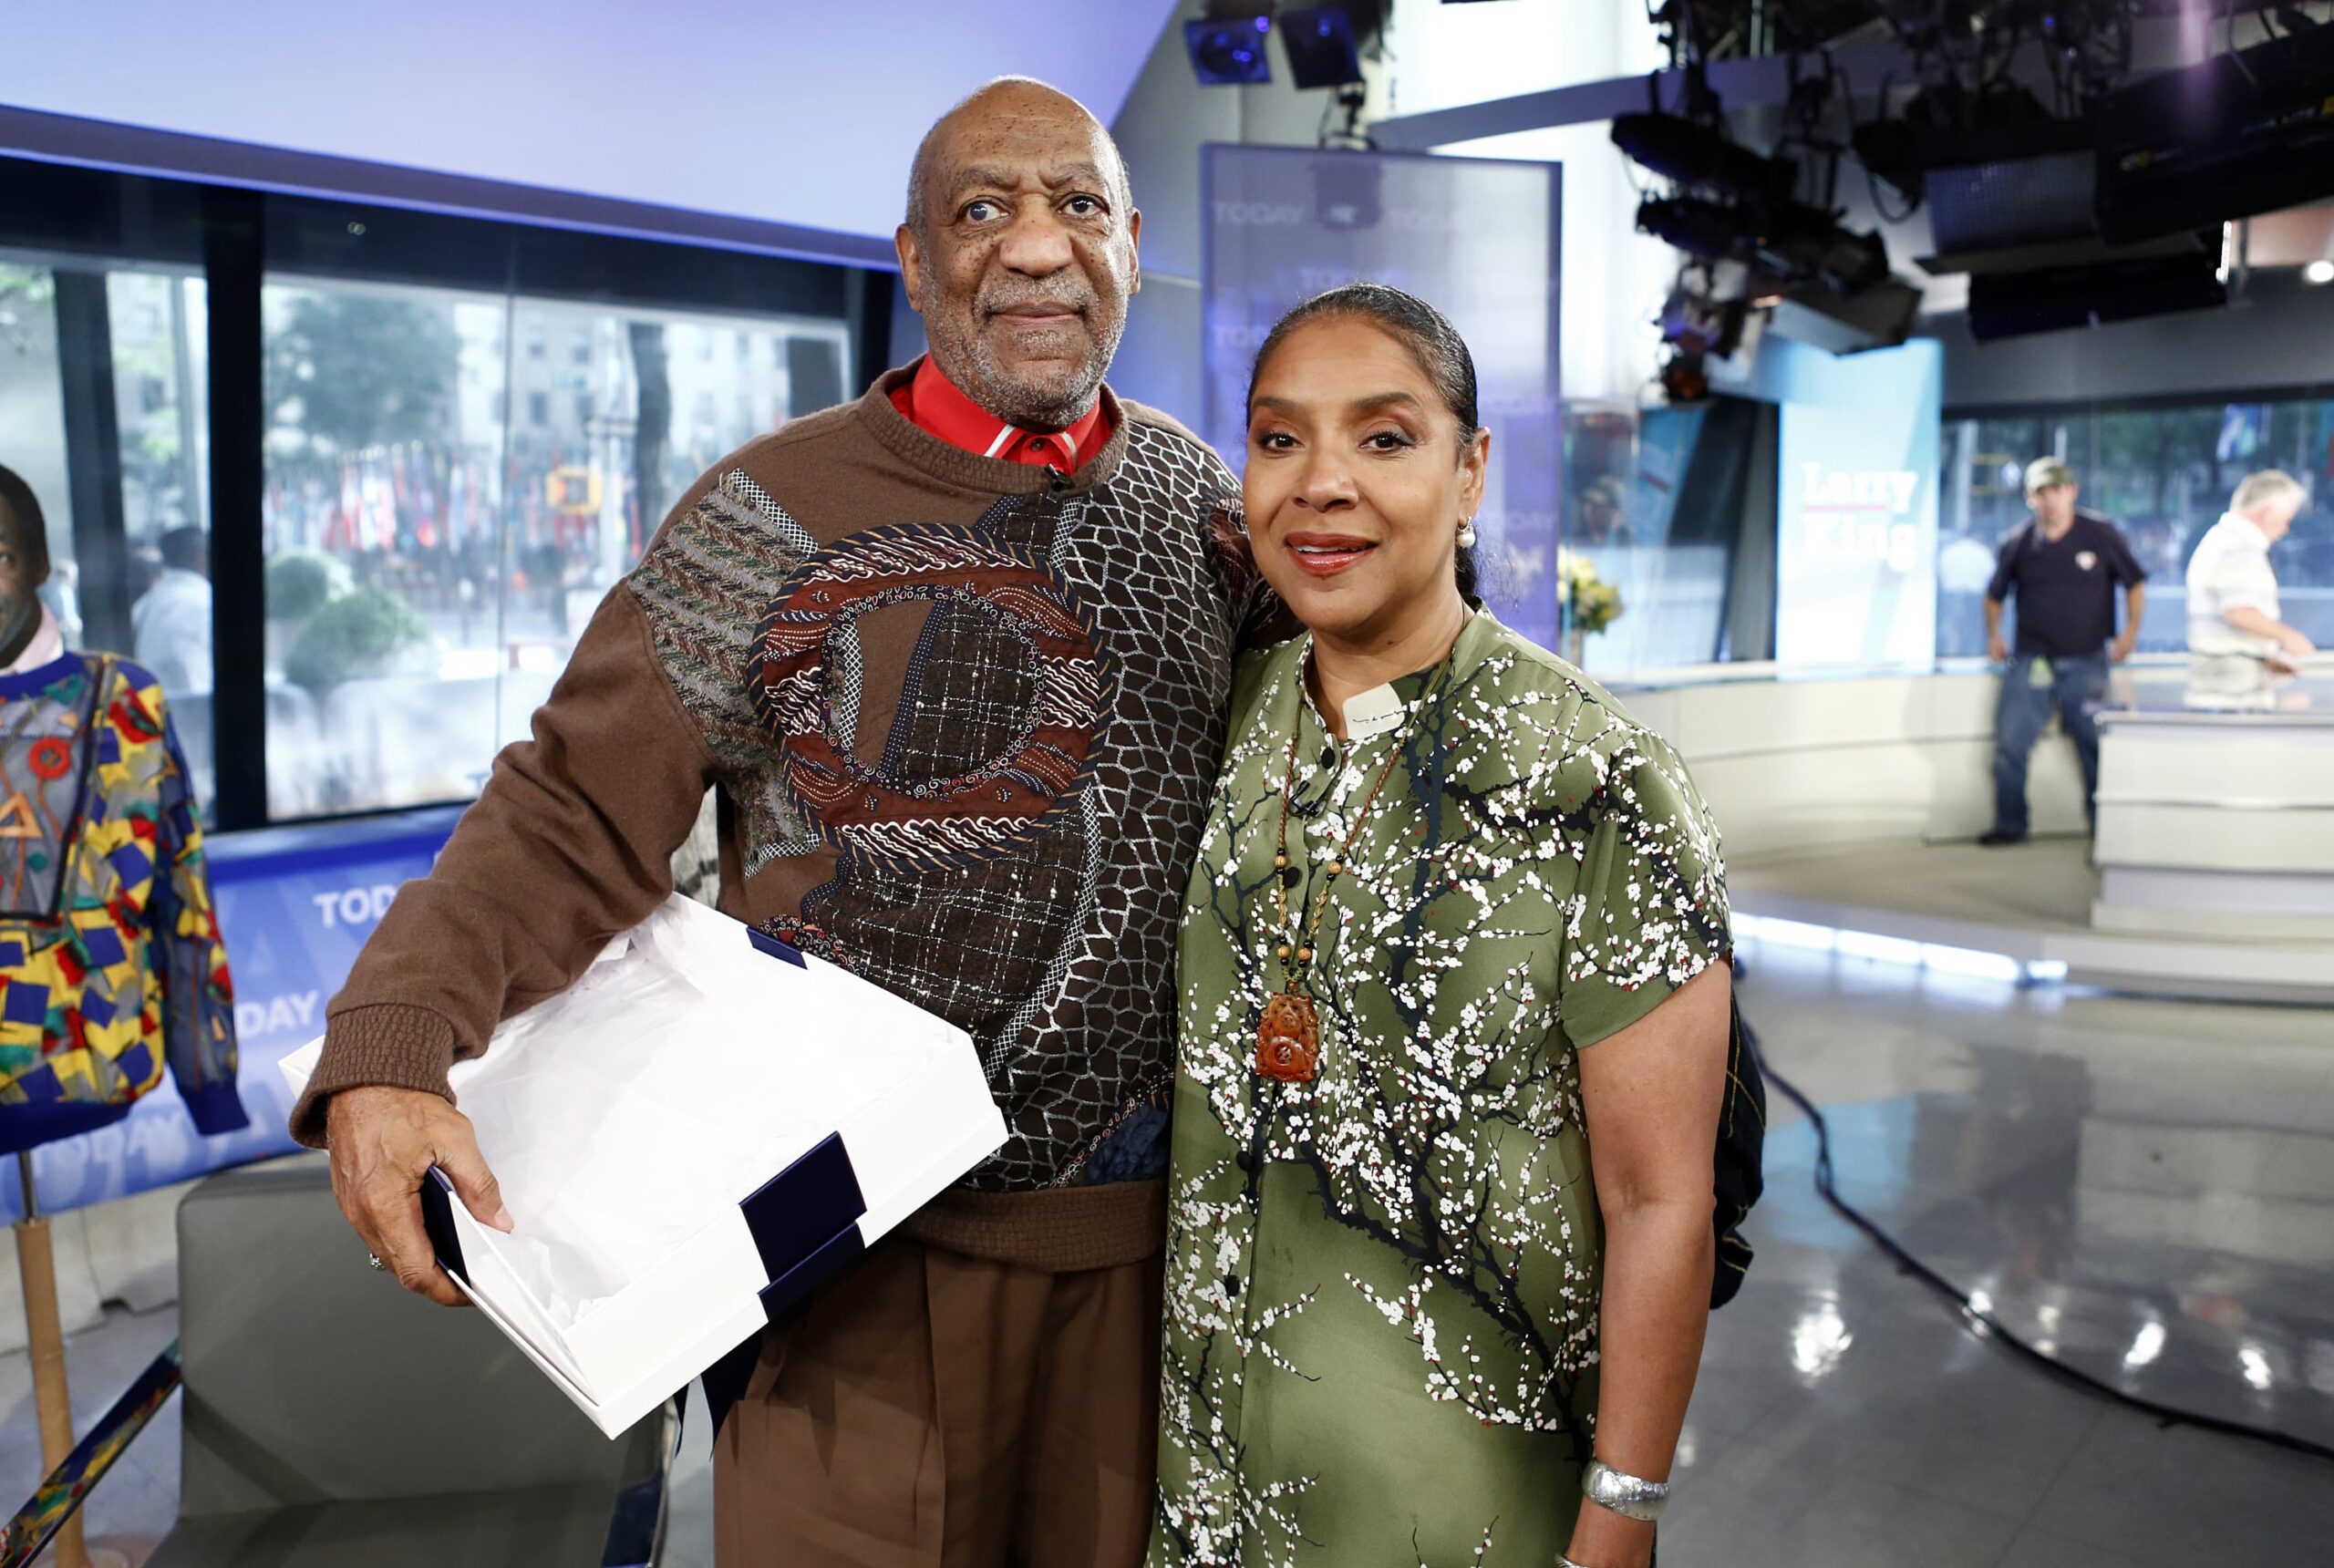 Phylicia Rashad’s feedback on Invoice Cosby’s launch slammed on Twitter